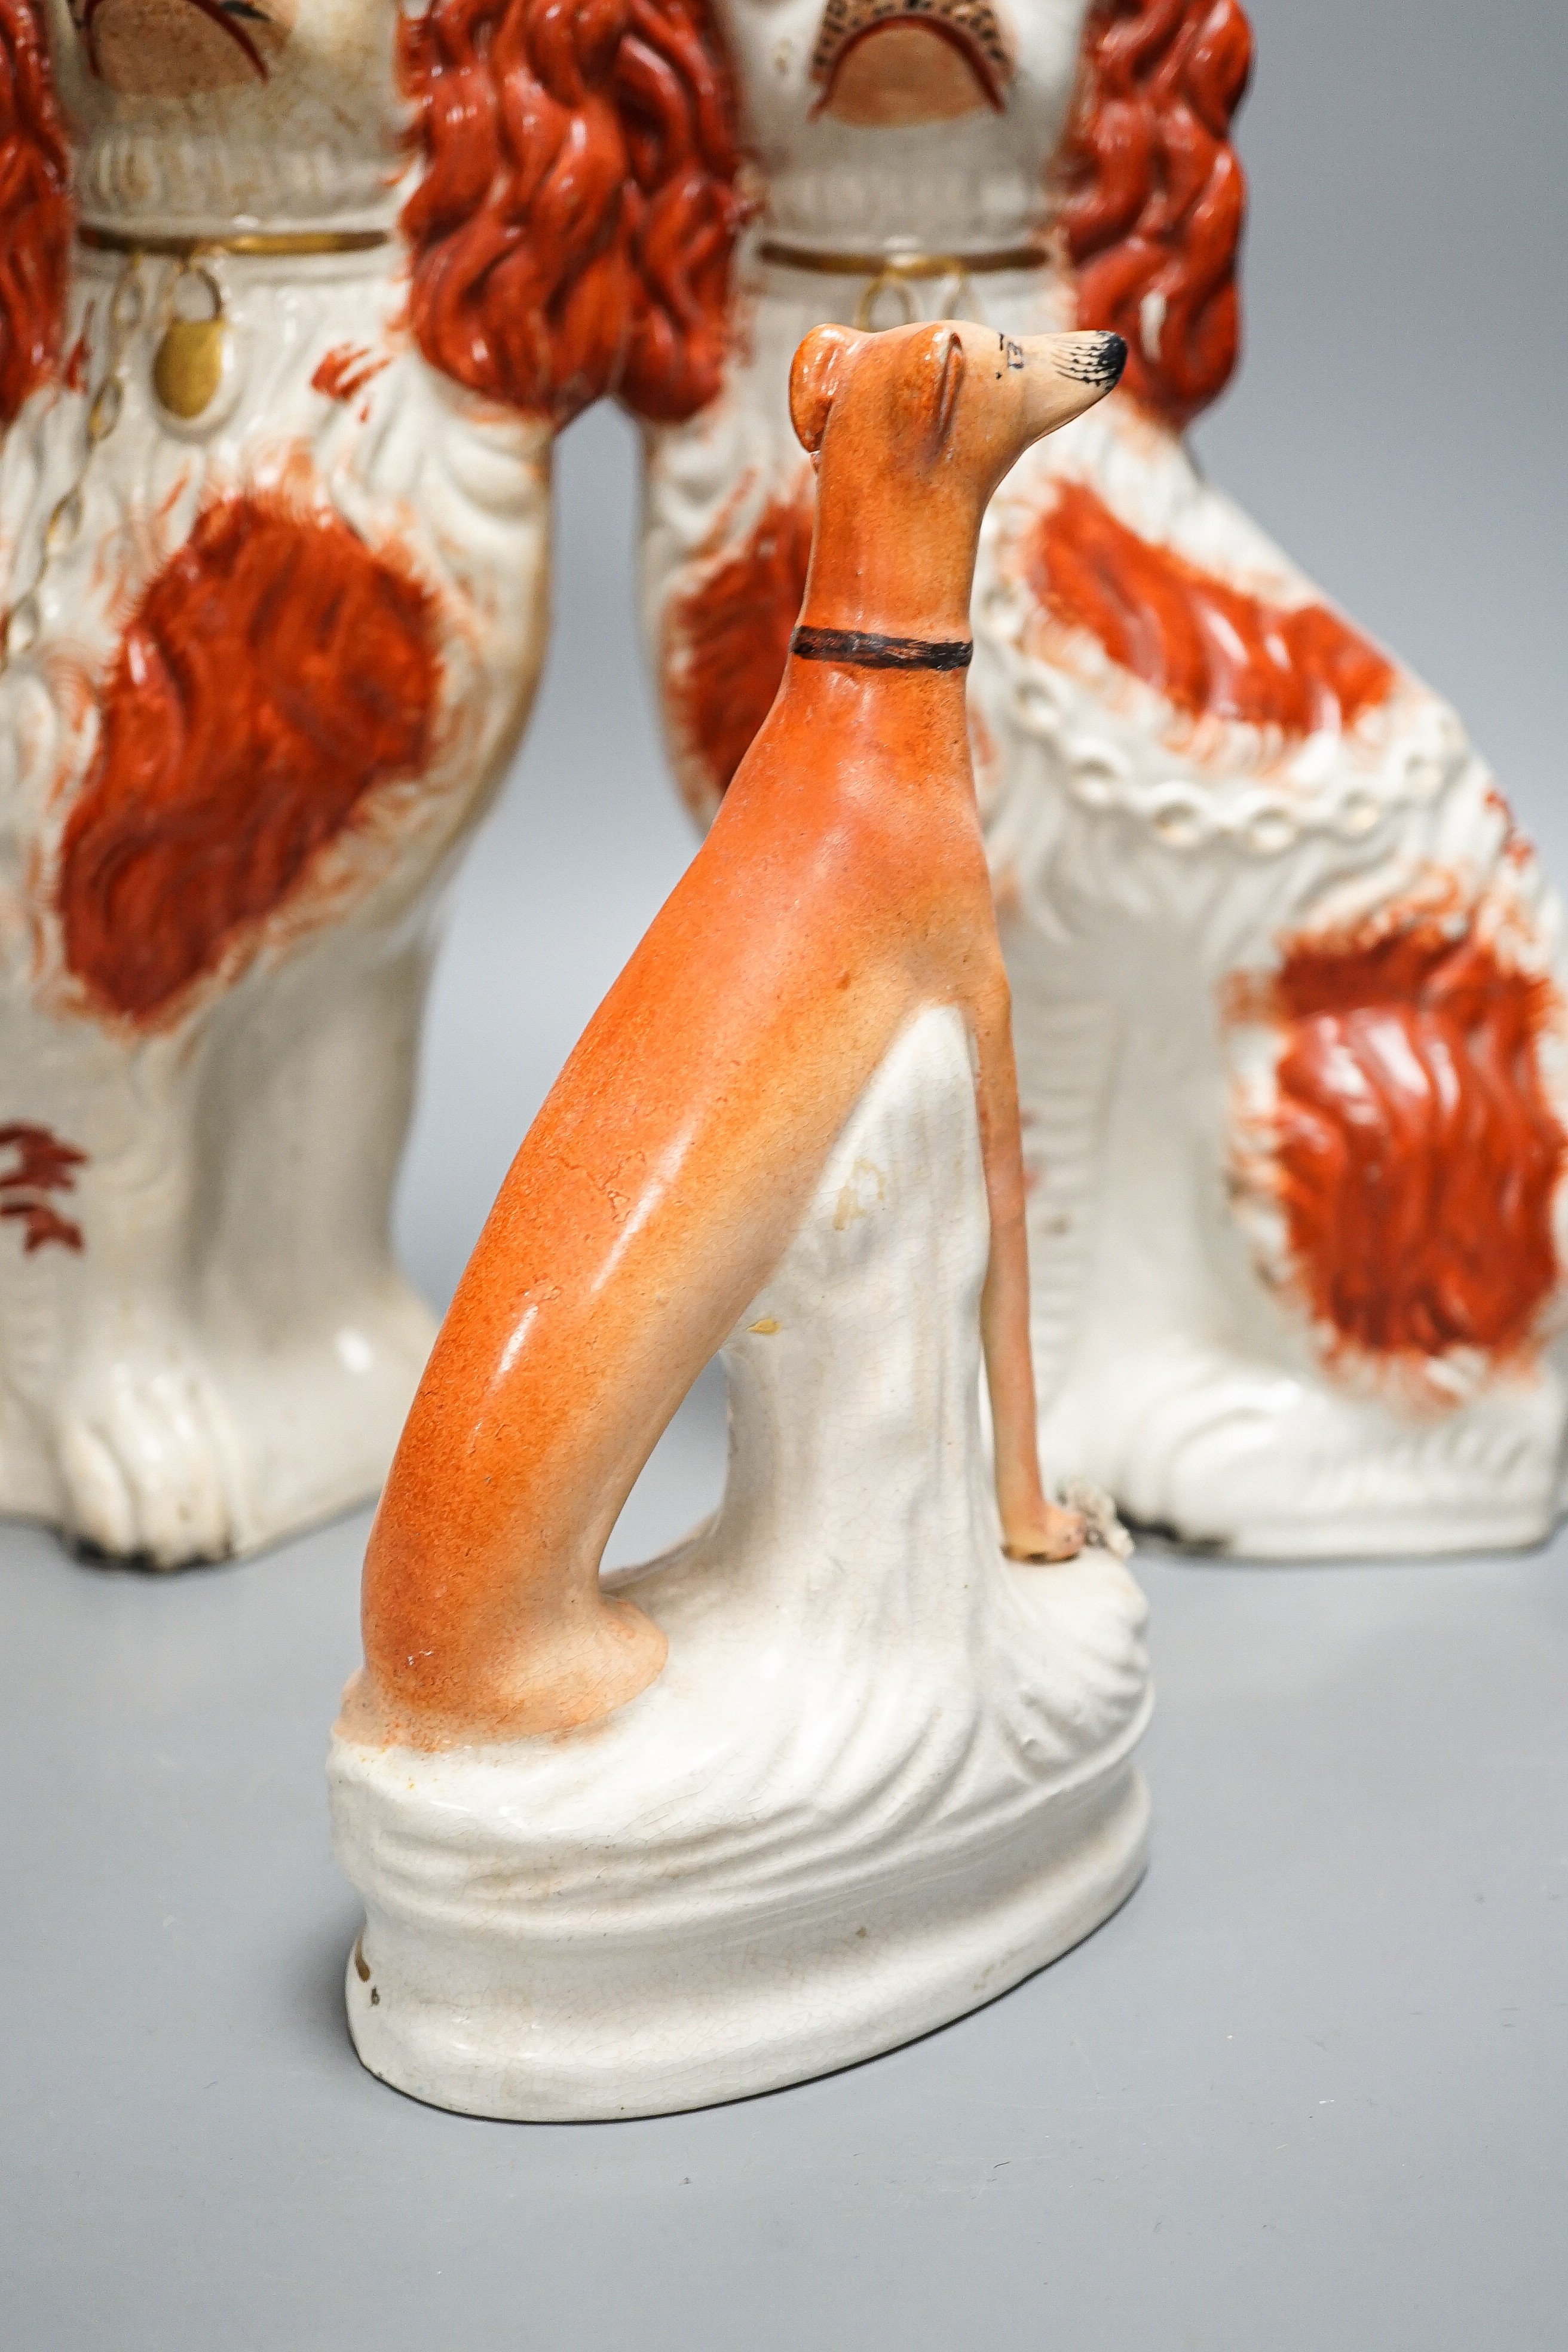 A pair of Victorian Staffordshire Spaniel chimney dogs and a greyhound, chimney dogs 31 cms high.